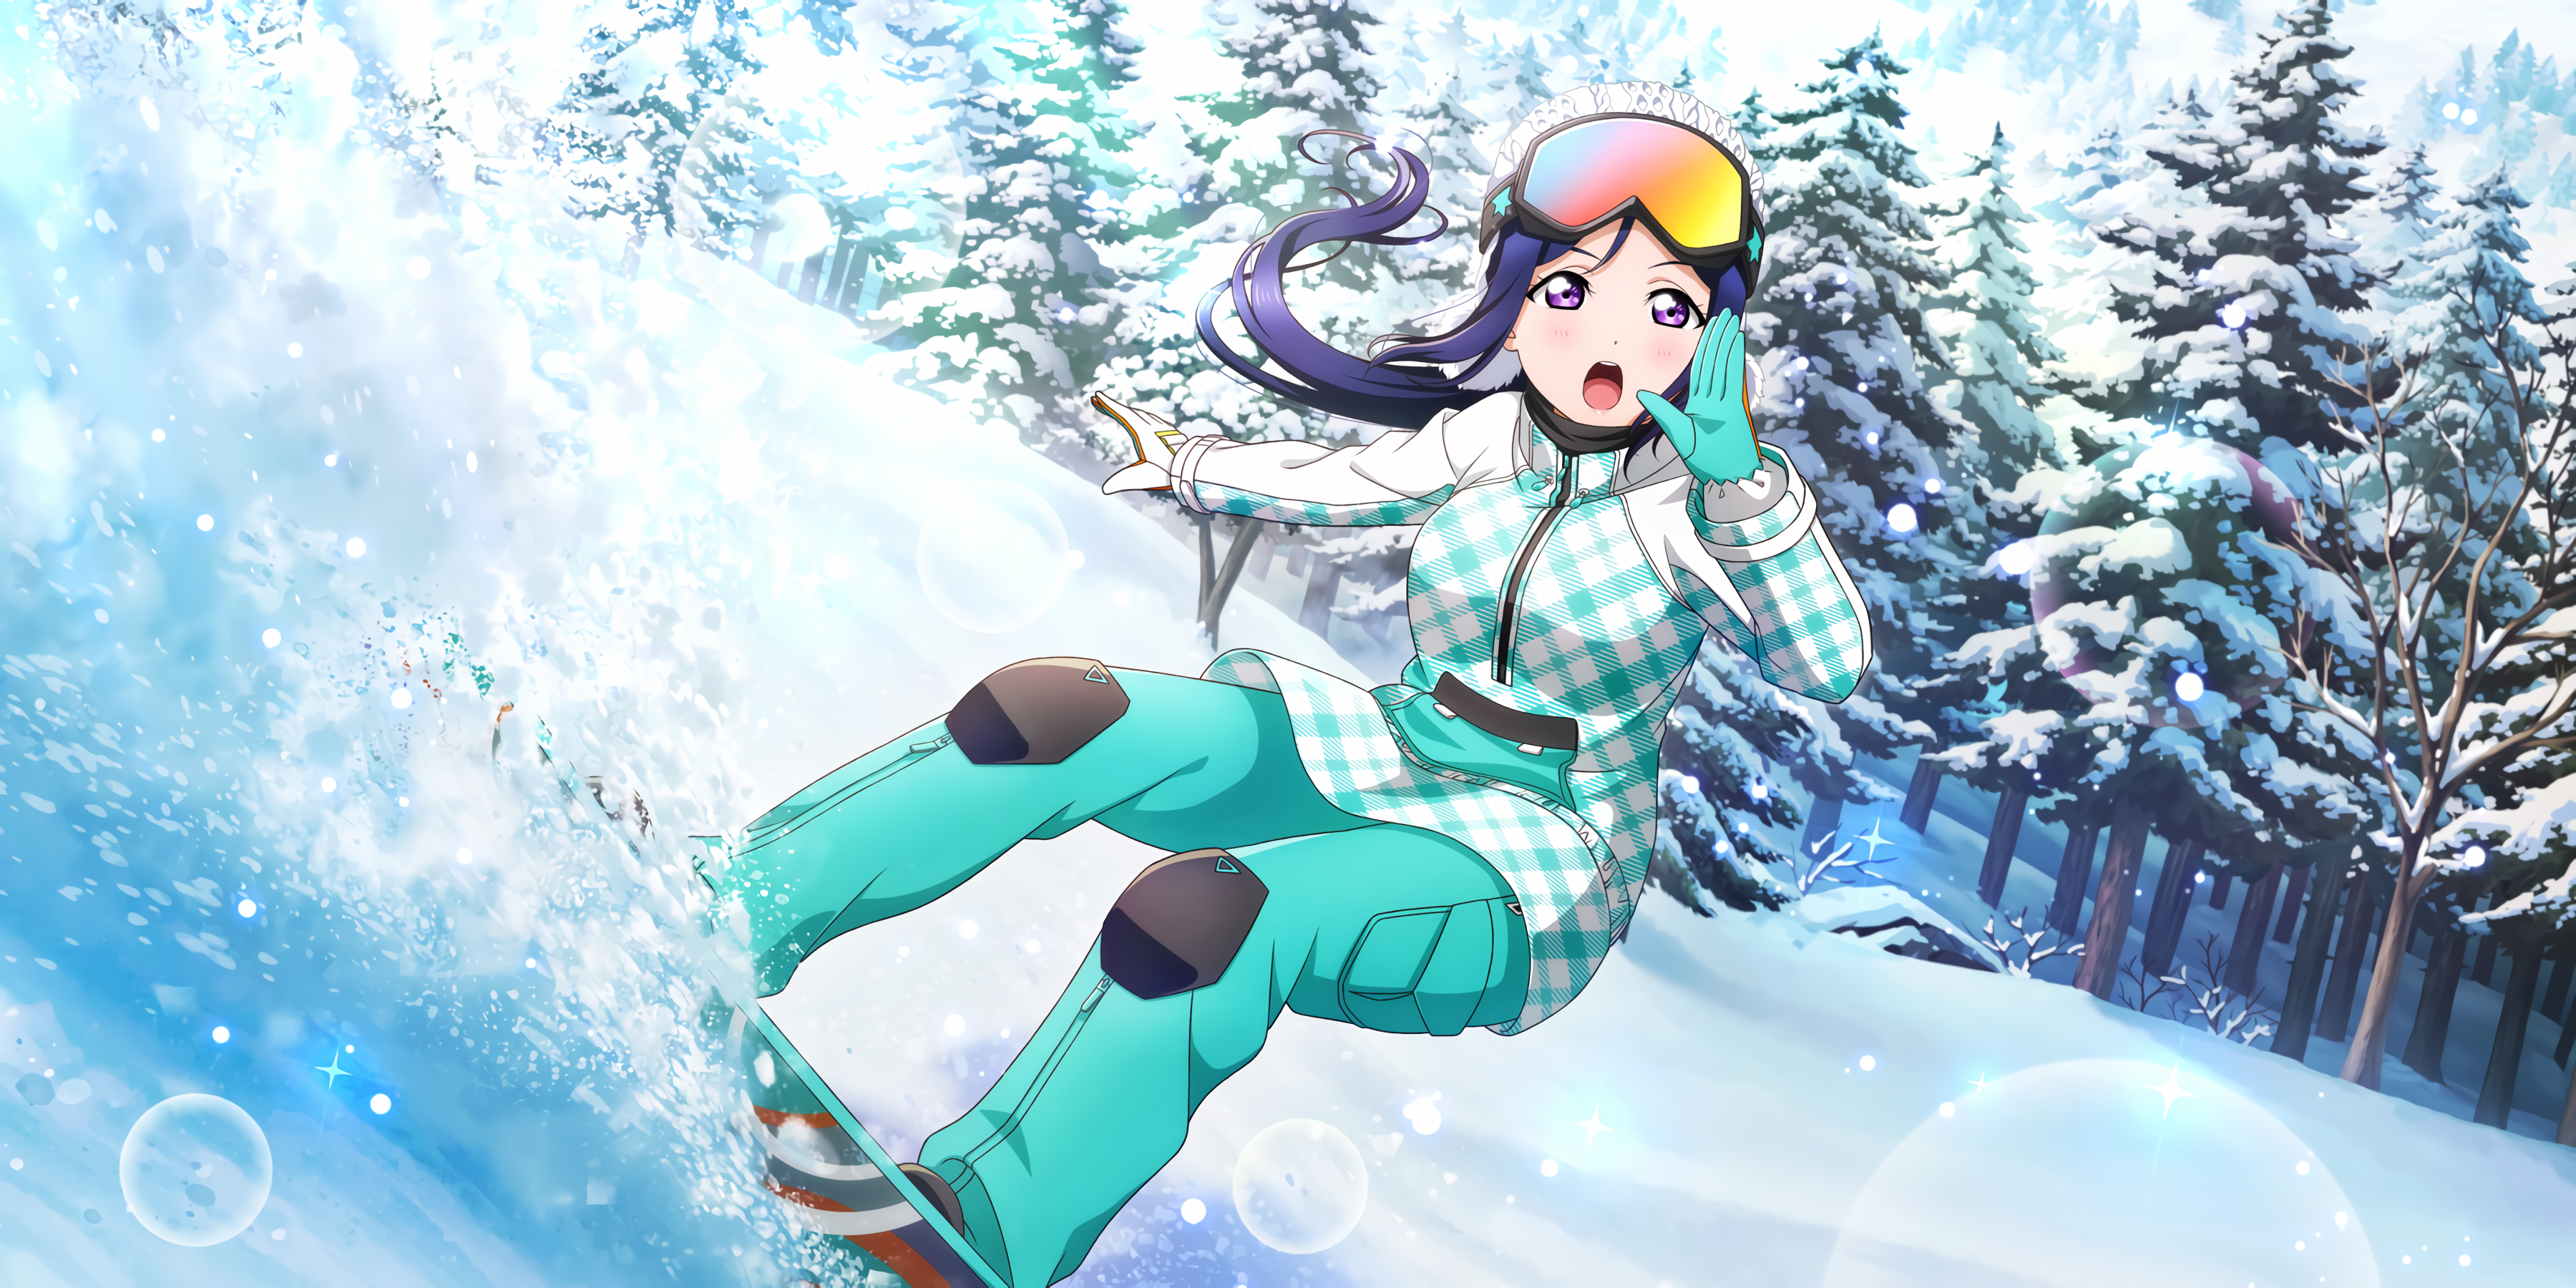 Update more than 69 anime snowboards super hot - awesomeenglish.edu.vn